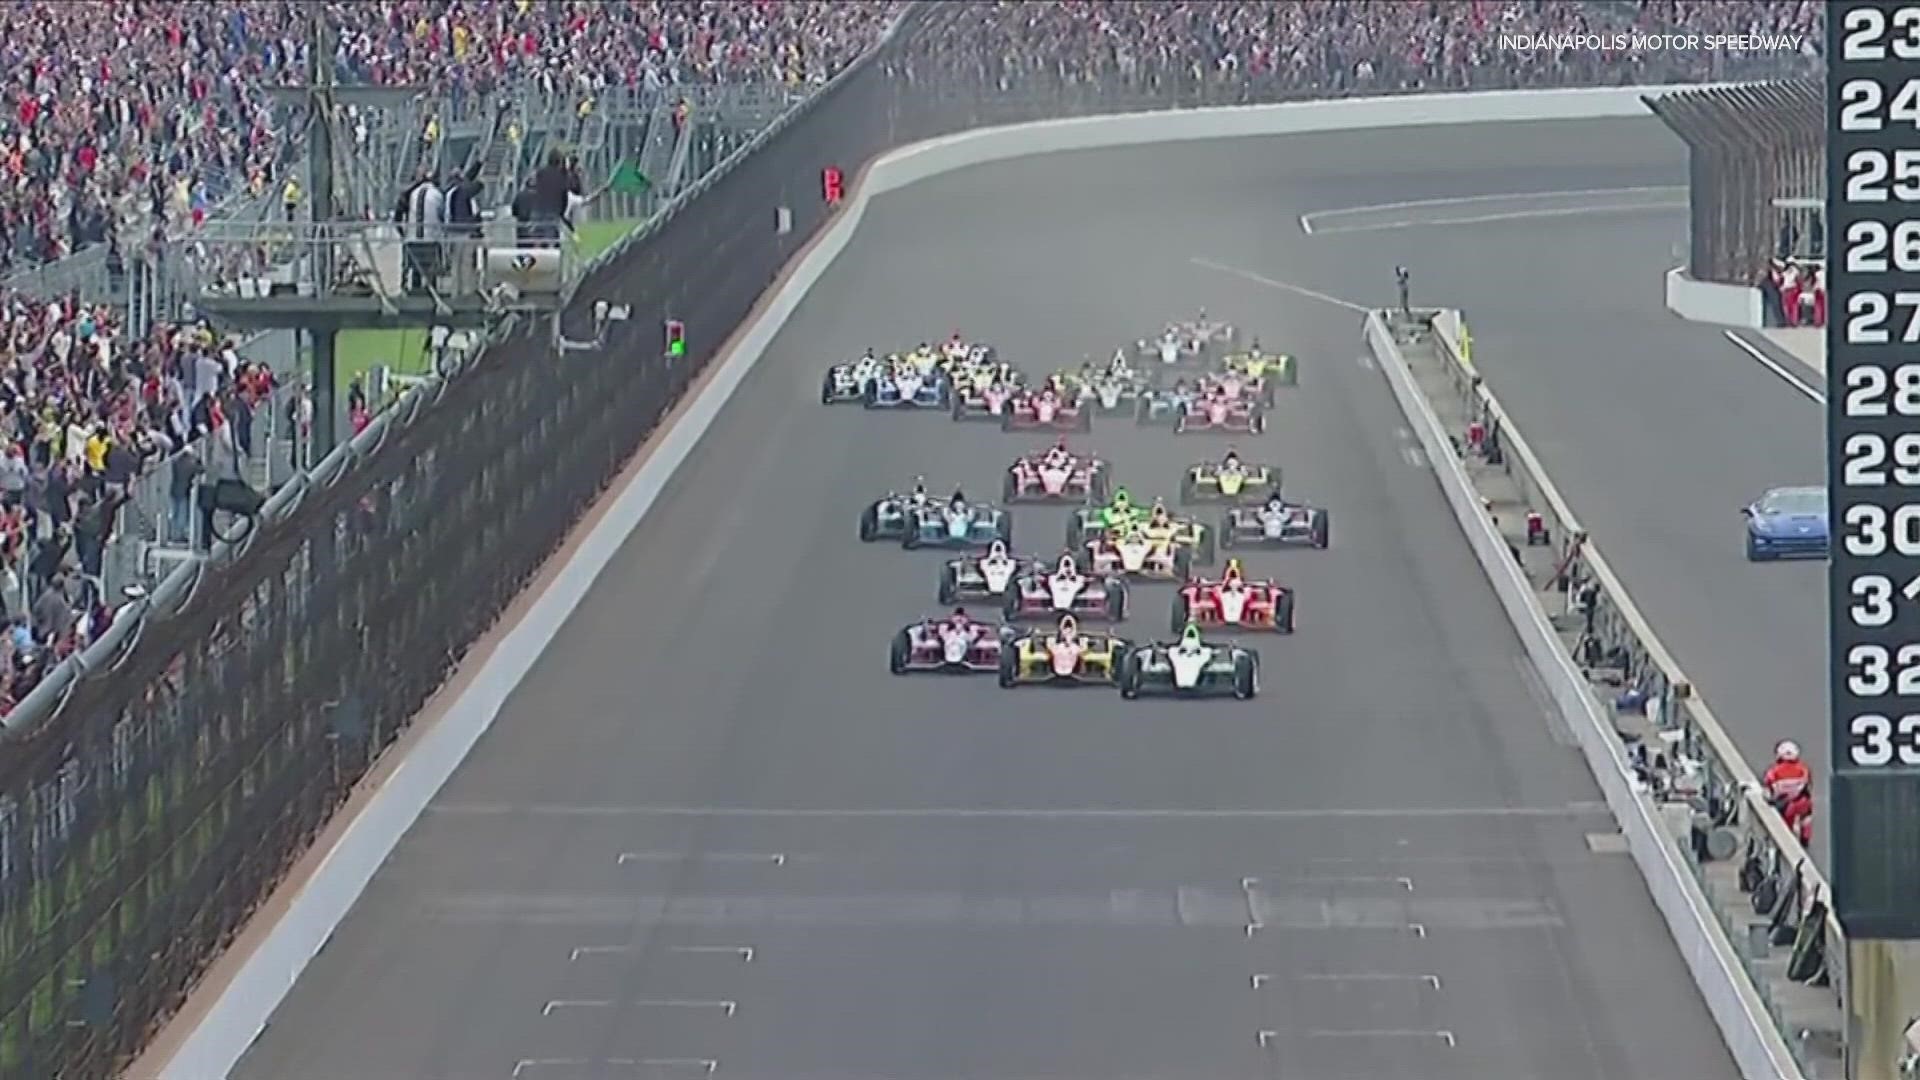 The crowd expected for the 106th Running of the Indianapolis 500 is expected to be the second largest in the past 20 years.